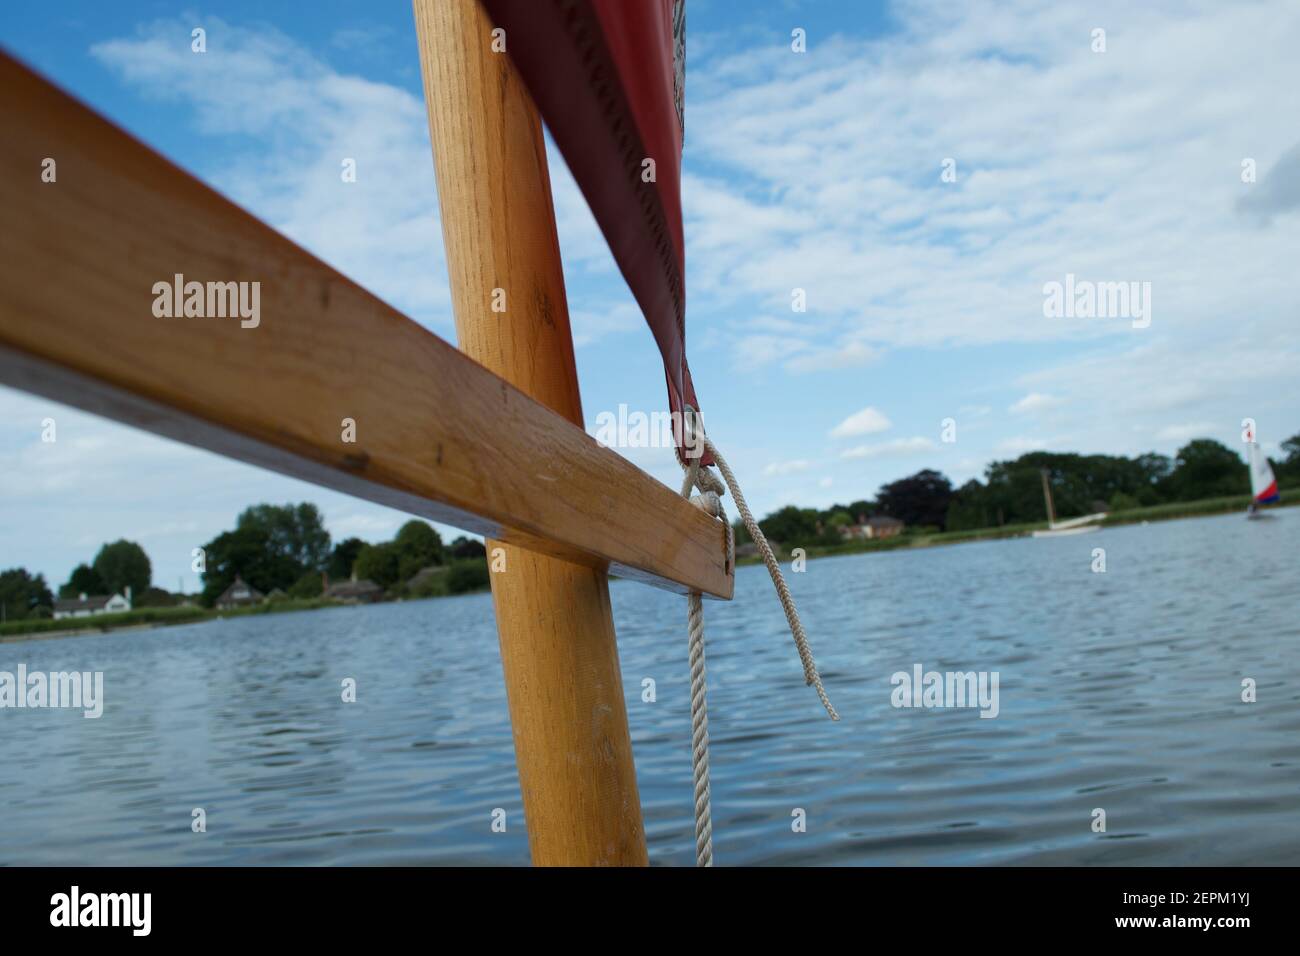 Close up of the wooden spar (boom) on a small sailing dinghy with a red sail, white ropes and wooden mast. Stock Photo